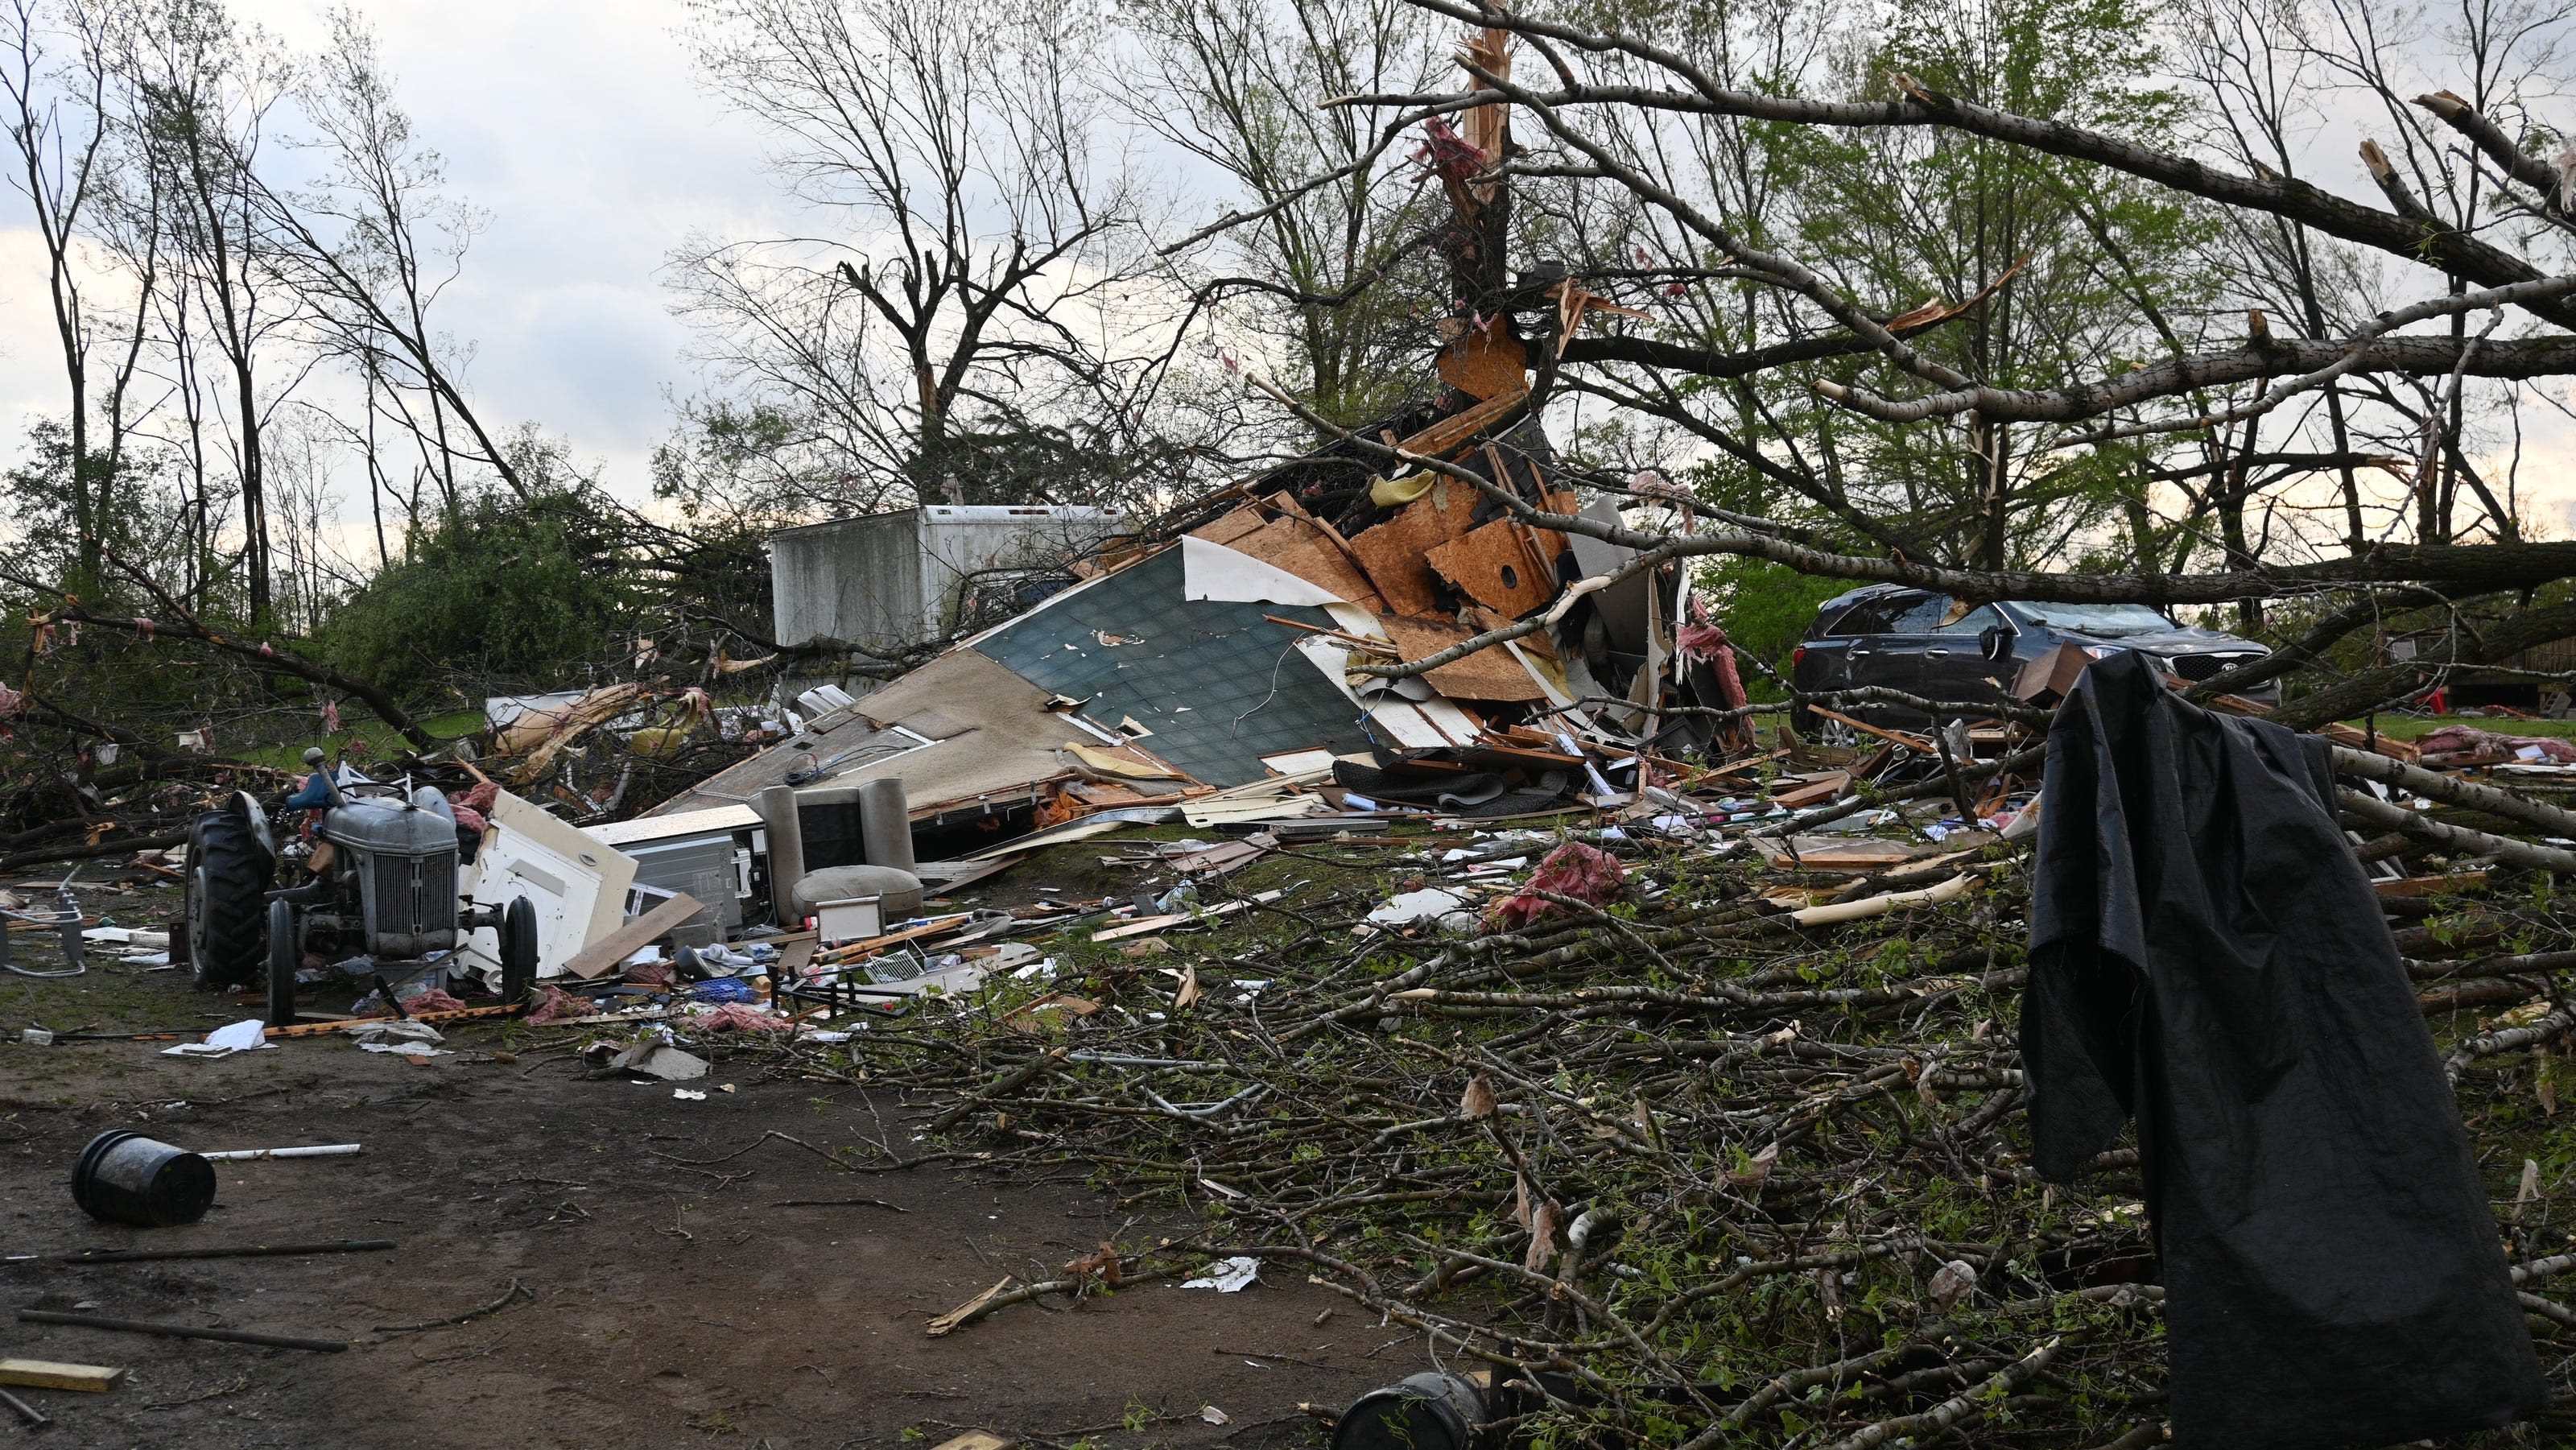 Powerful storms kill 3 people as tornadoes, hailstorms sweep across Central US: Updates